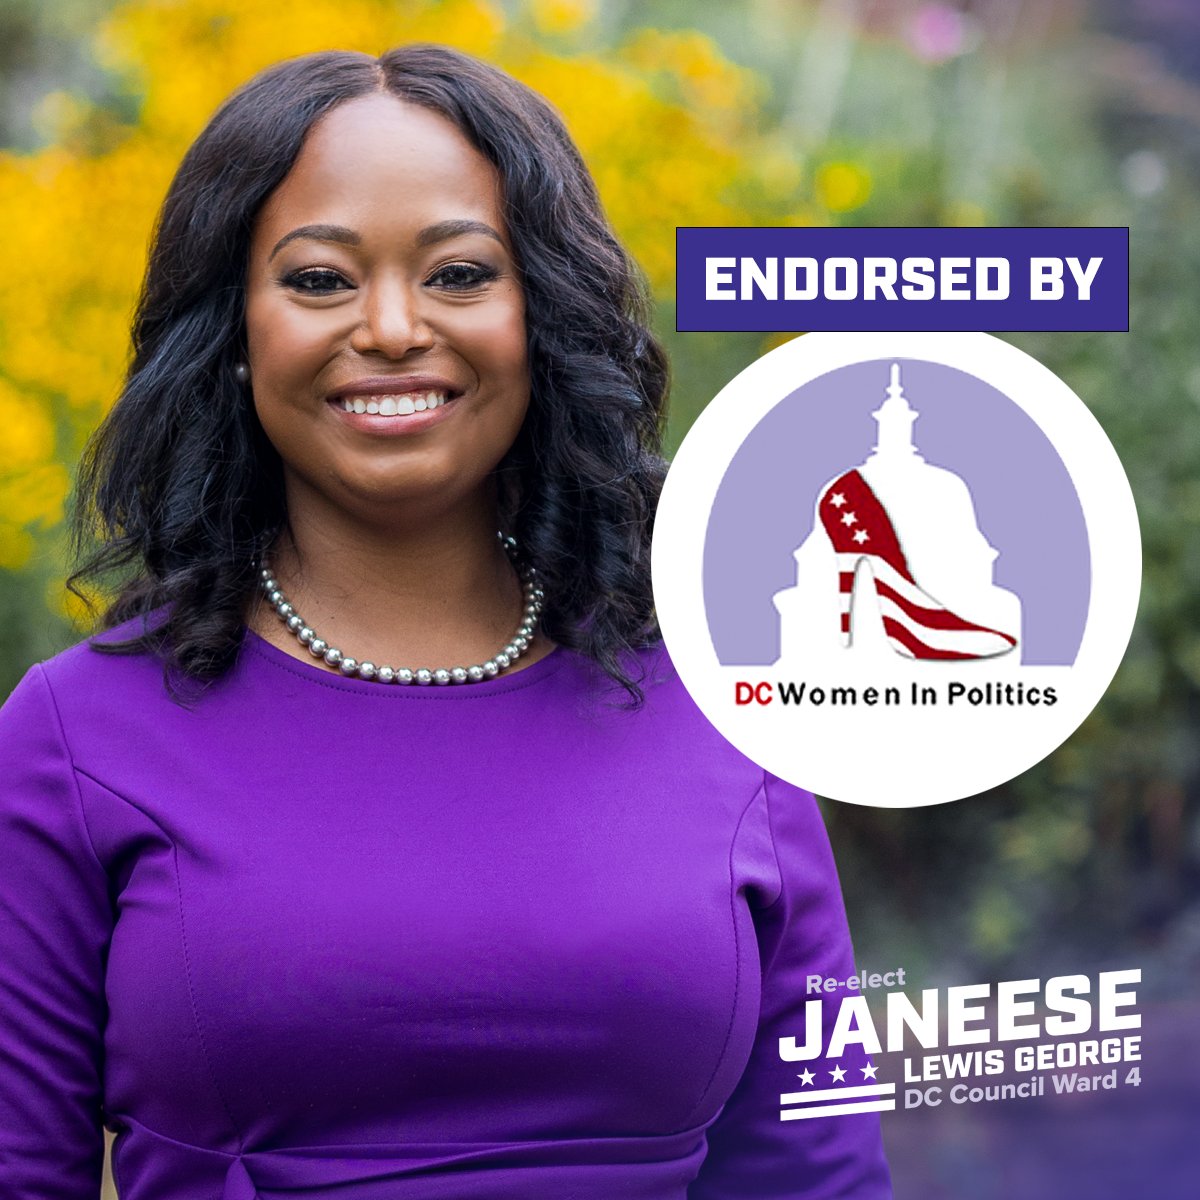 I’m honored to earn the support of an overwhelming majority of @dcwomen_politcs poll participants! DC Women in Politics encourages women to run for office in DC, and I'm grateful for their ongoing work to make the political landscape more equitable and inclusive.